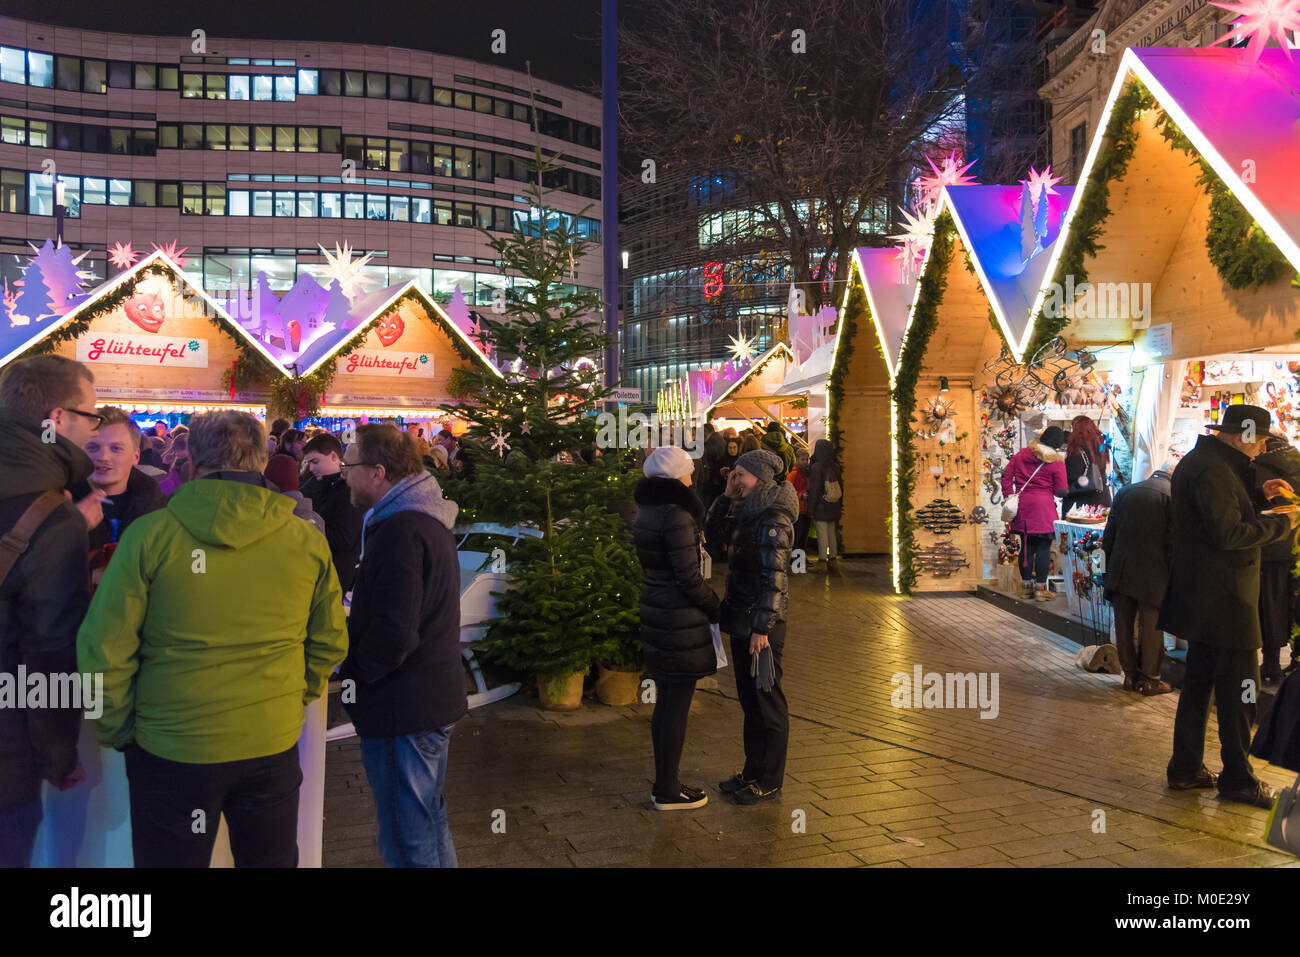 Dusseldorf, Germany - December 1, 2017 : Christmas market in the city of Dusseldorf, an international business and financial centre Stock Photo